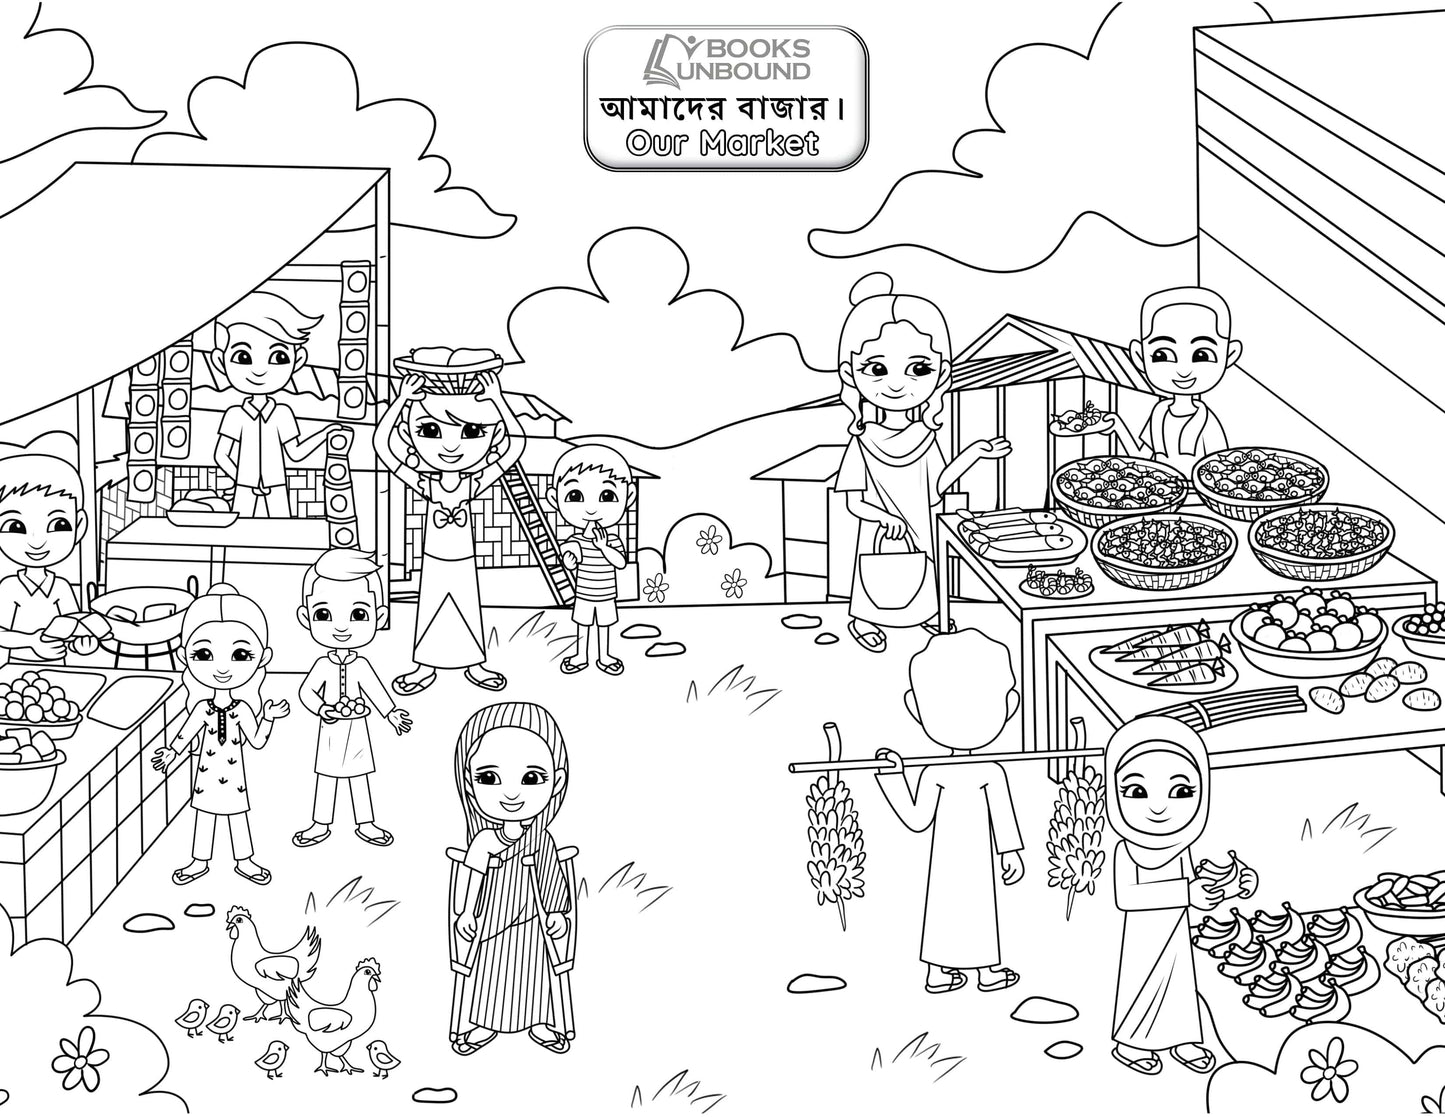 Coloring Page: Our Market